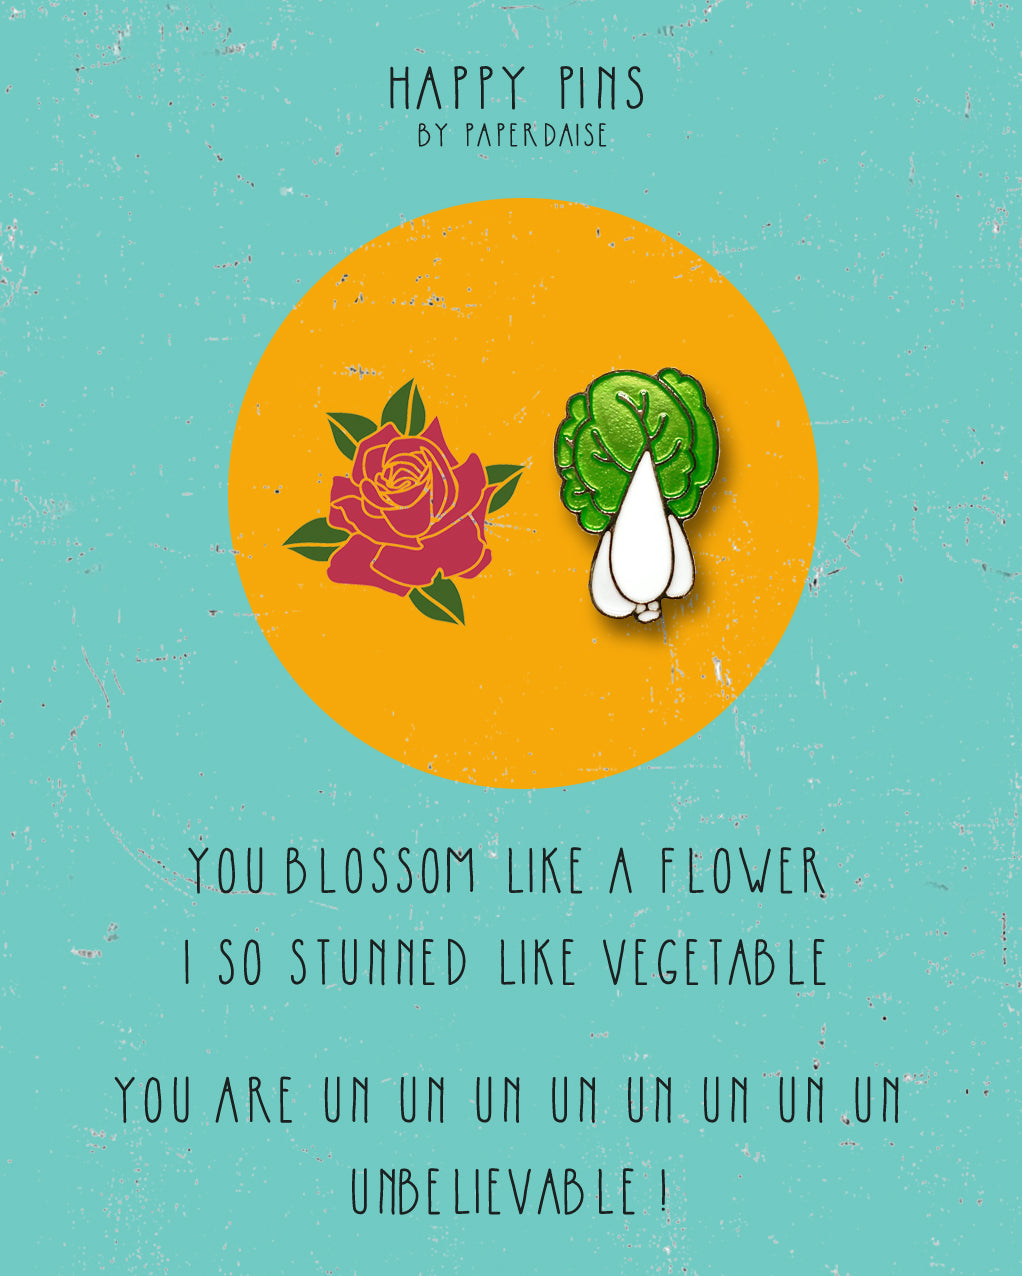 I So Stunned like Vegetable Pin - LM